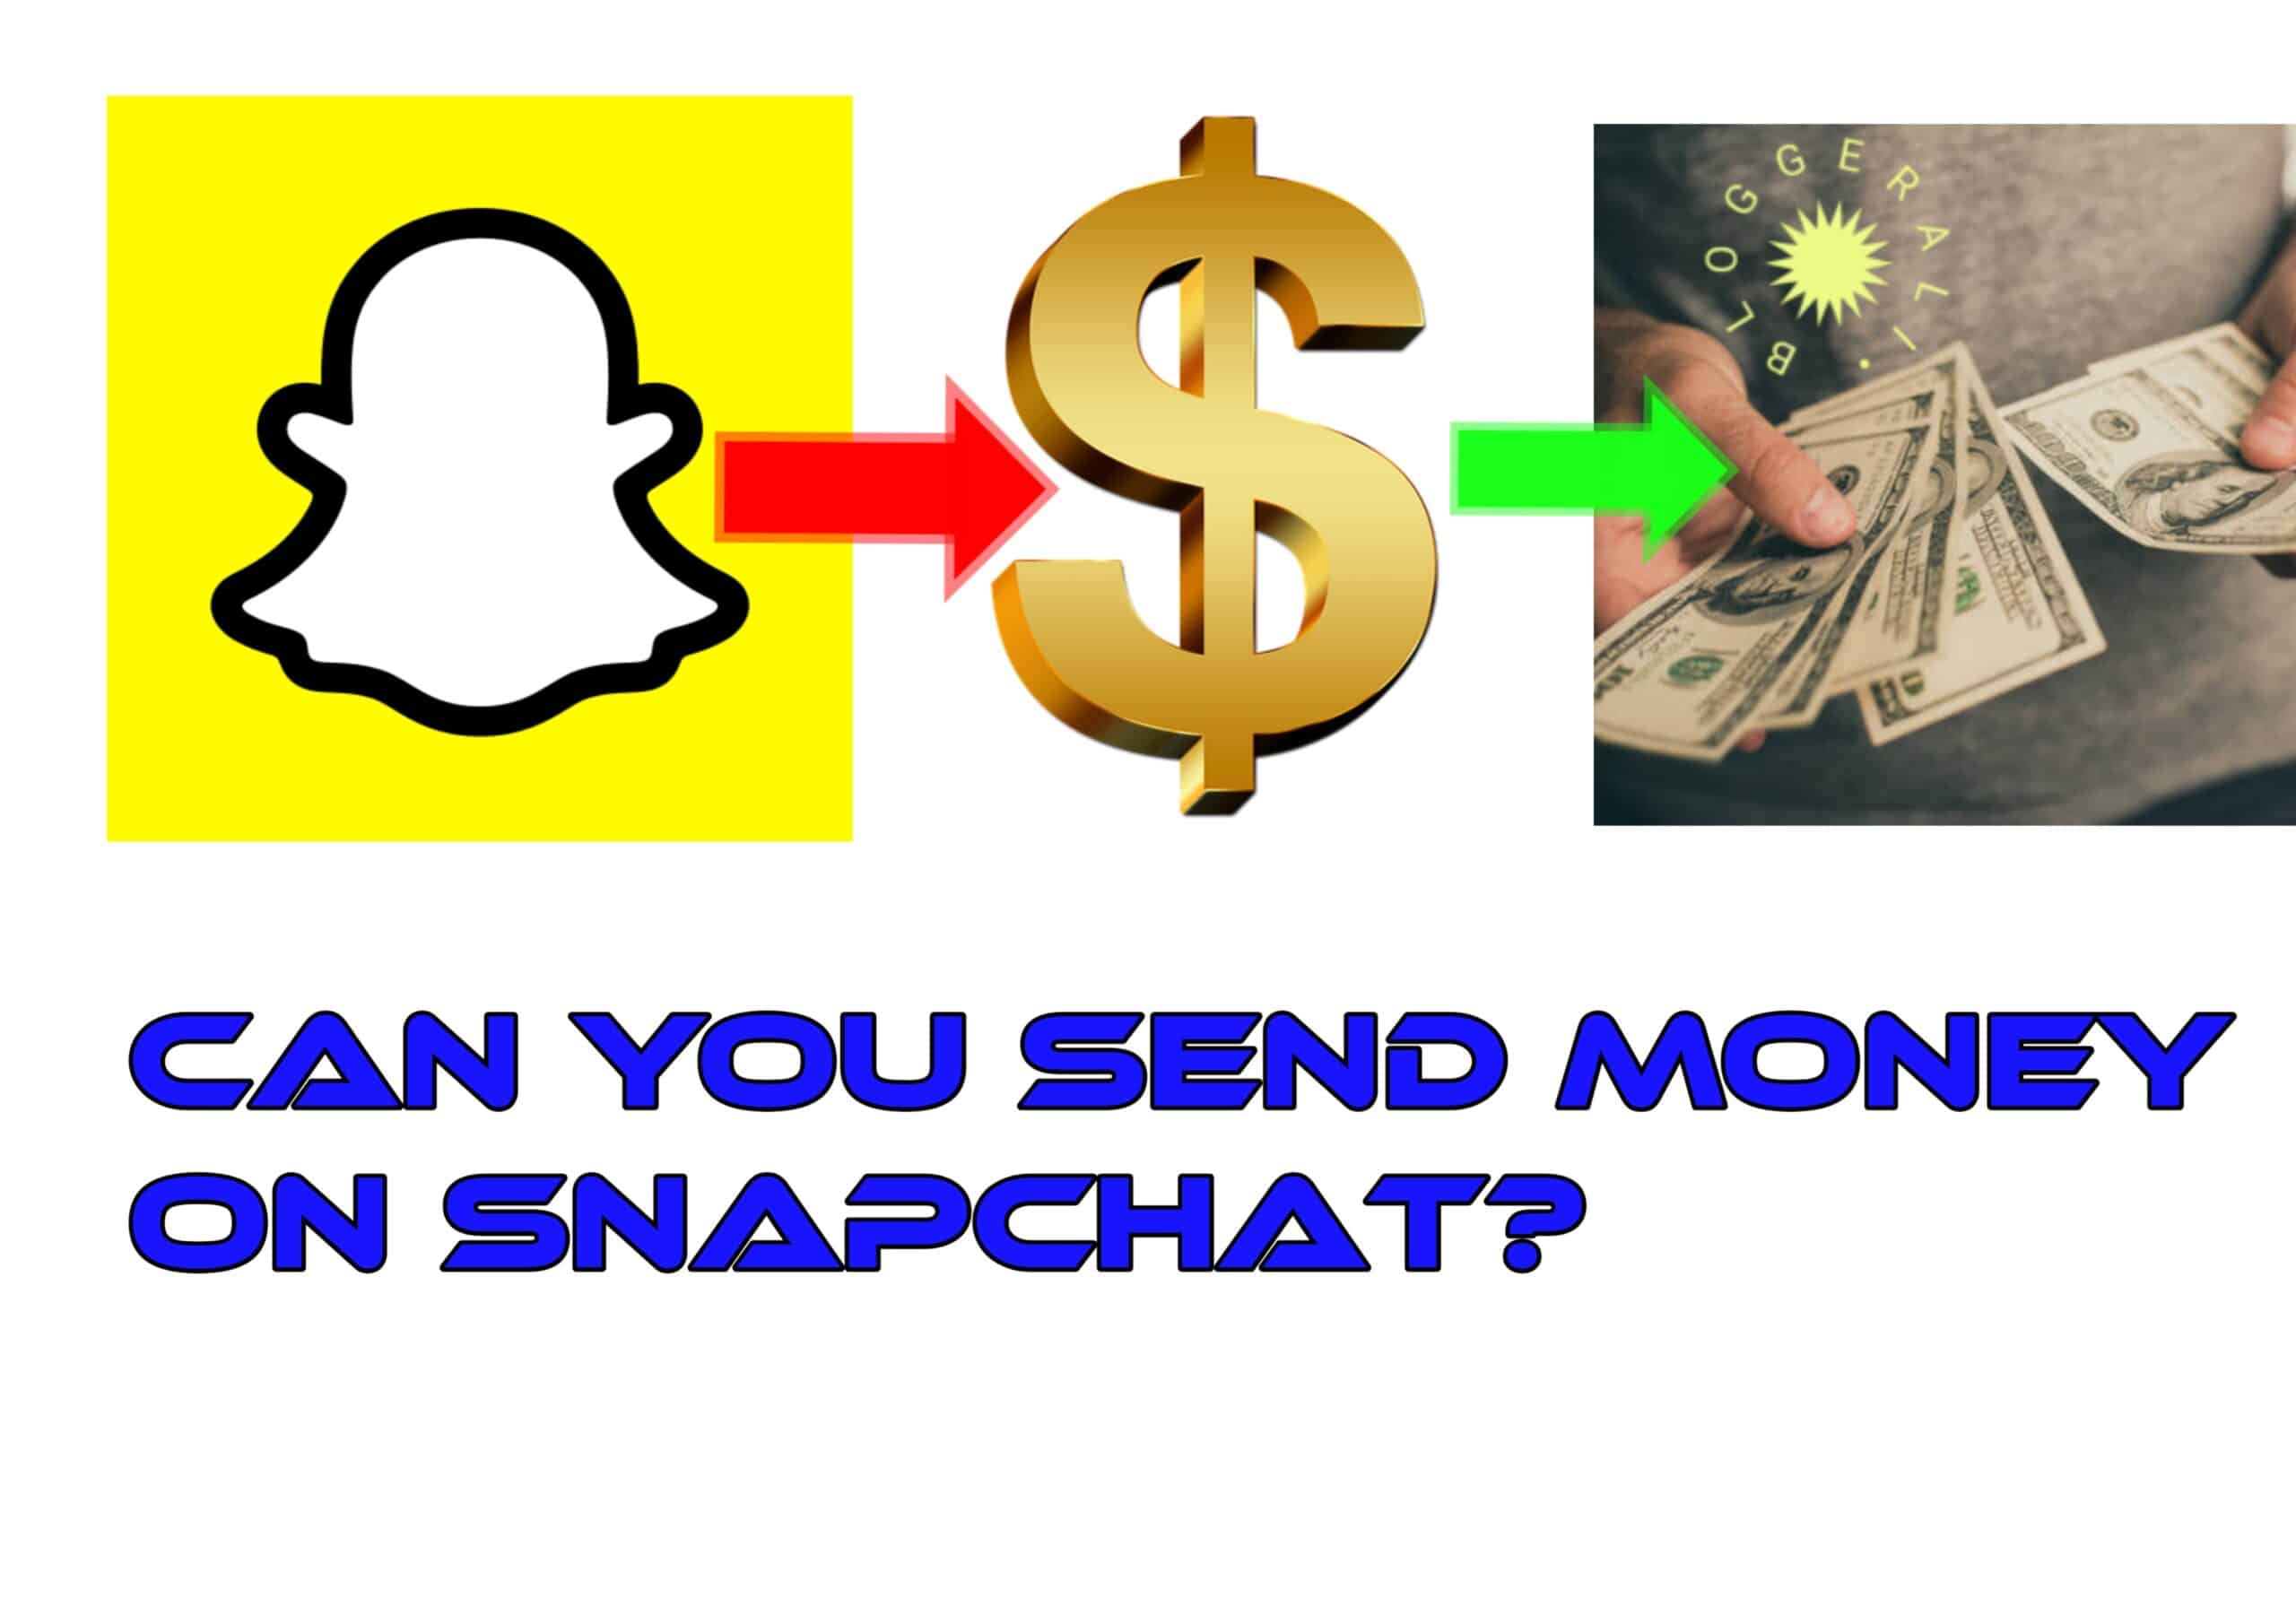 Can you send money on snapchat